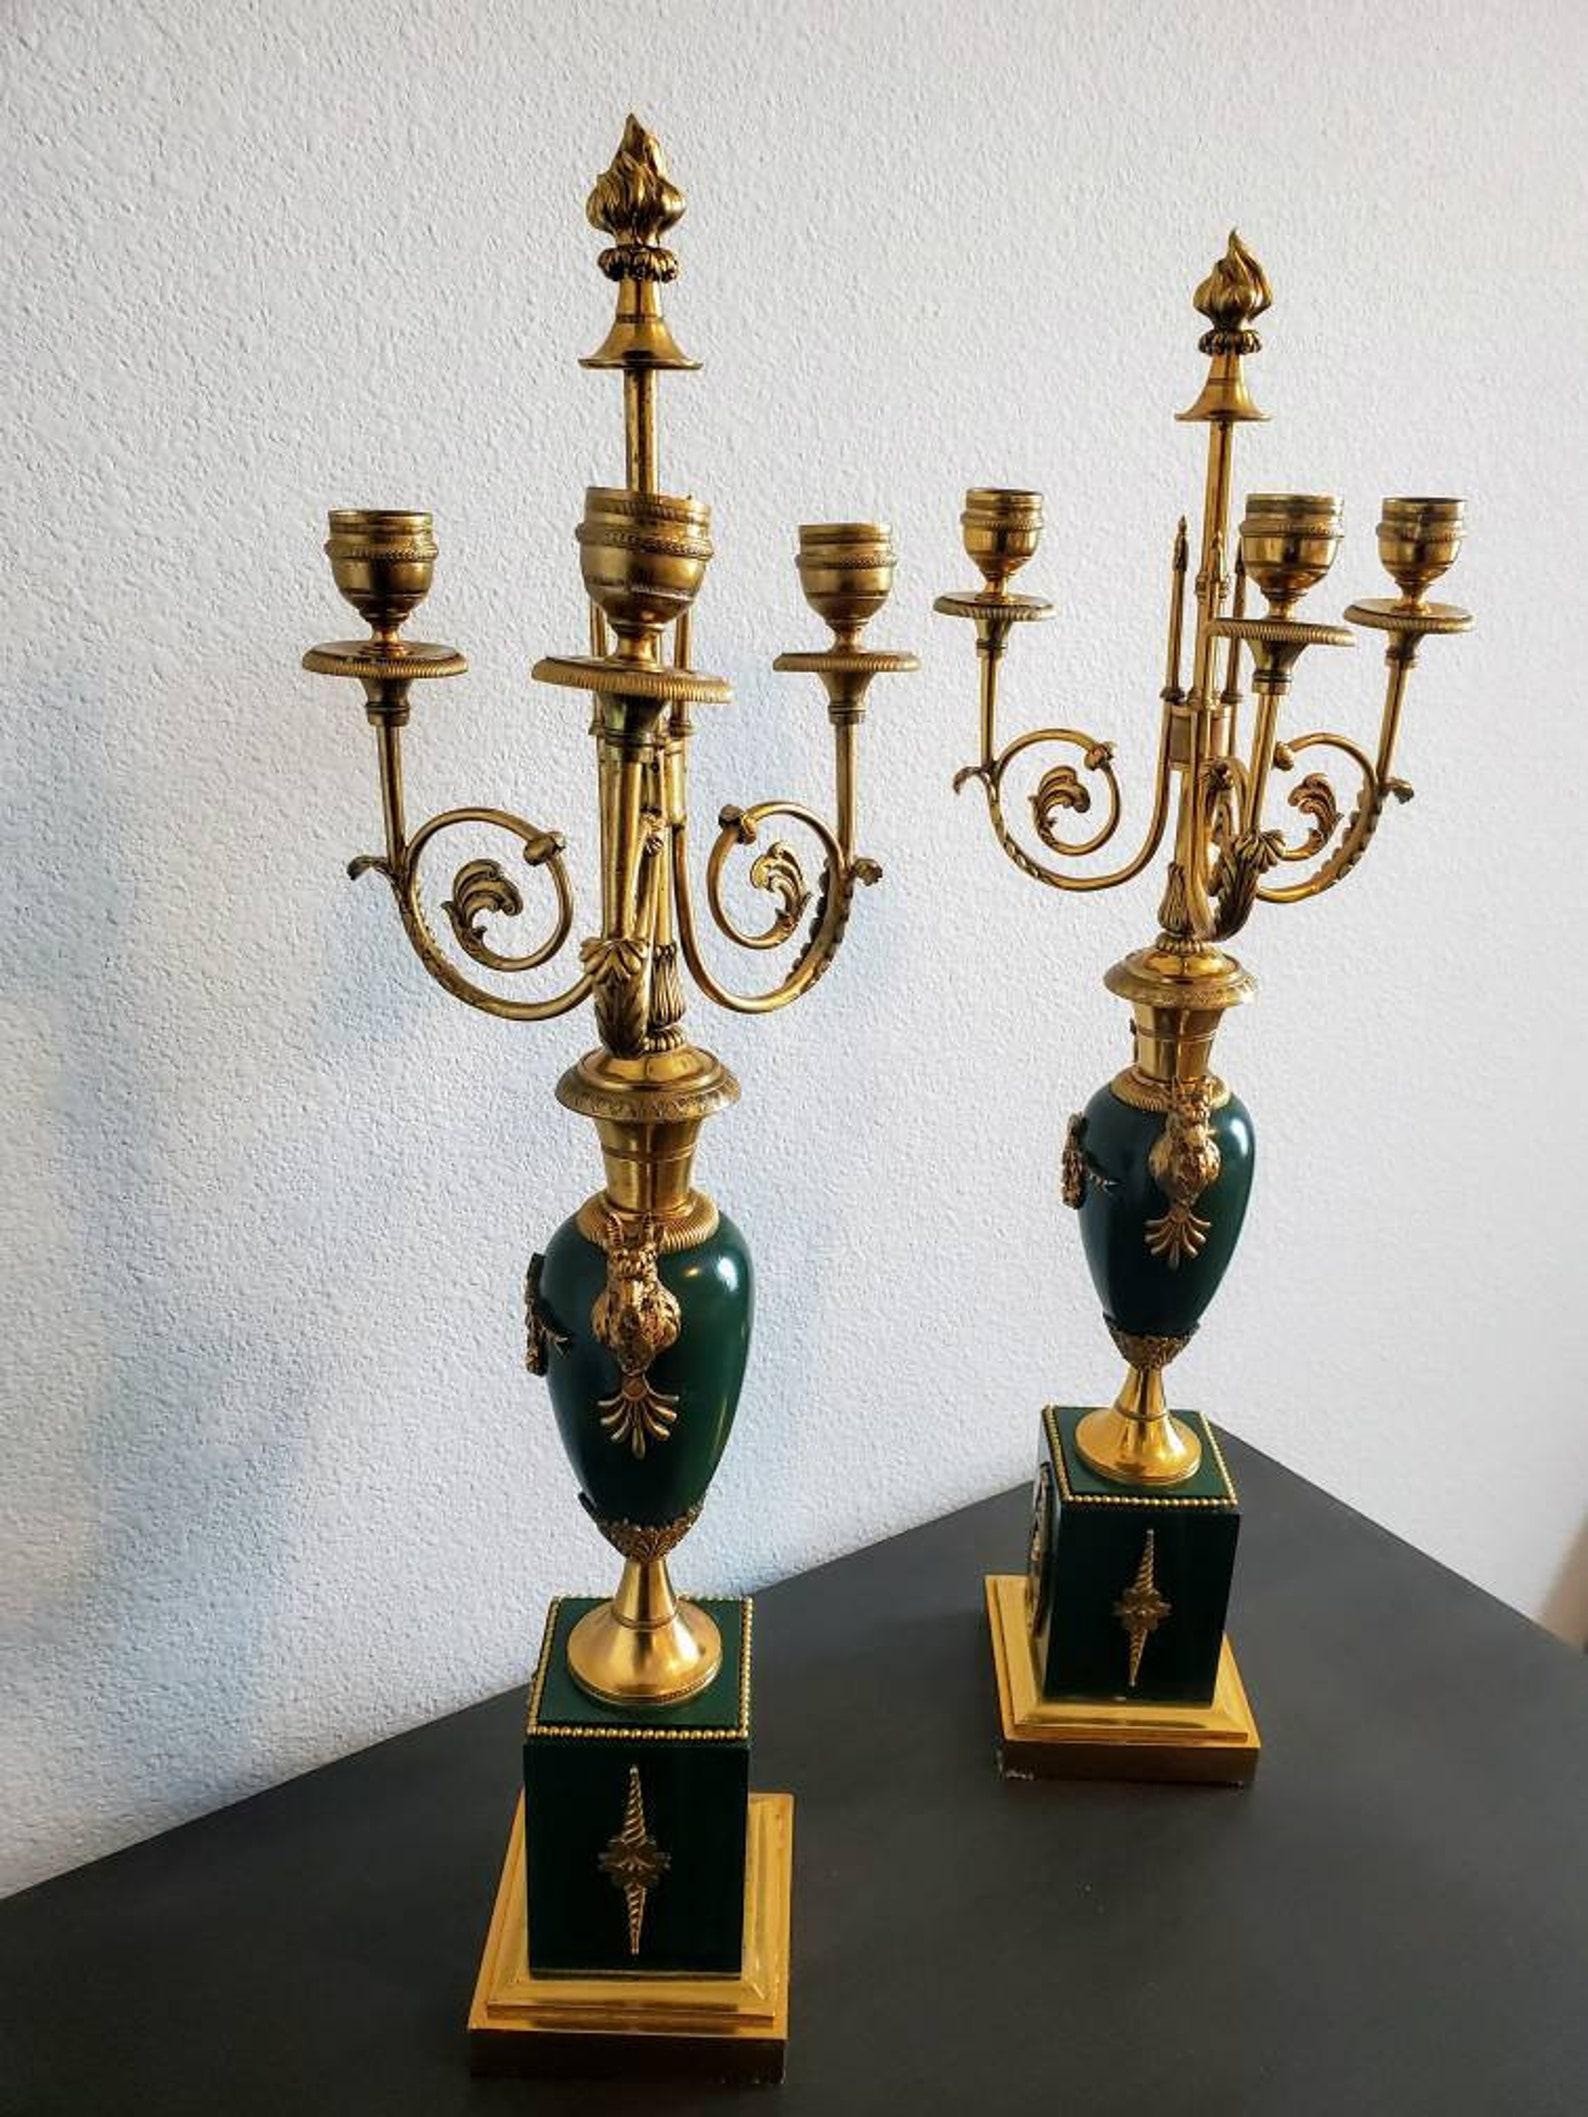 Pair of Early 19th Century French Empire Period Candelabras For Sale 3